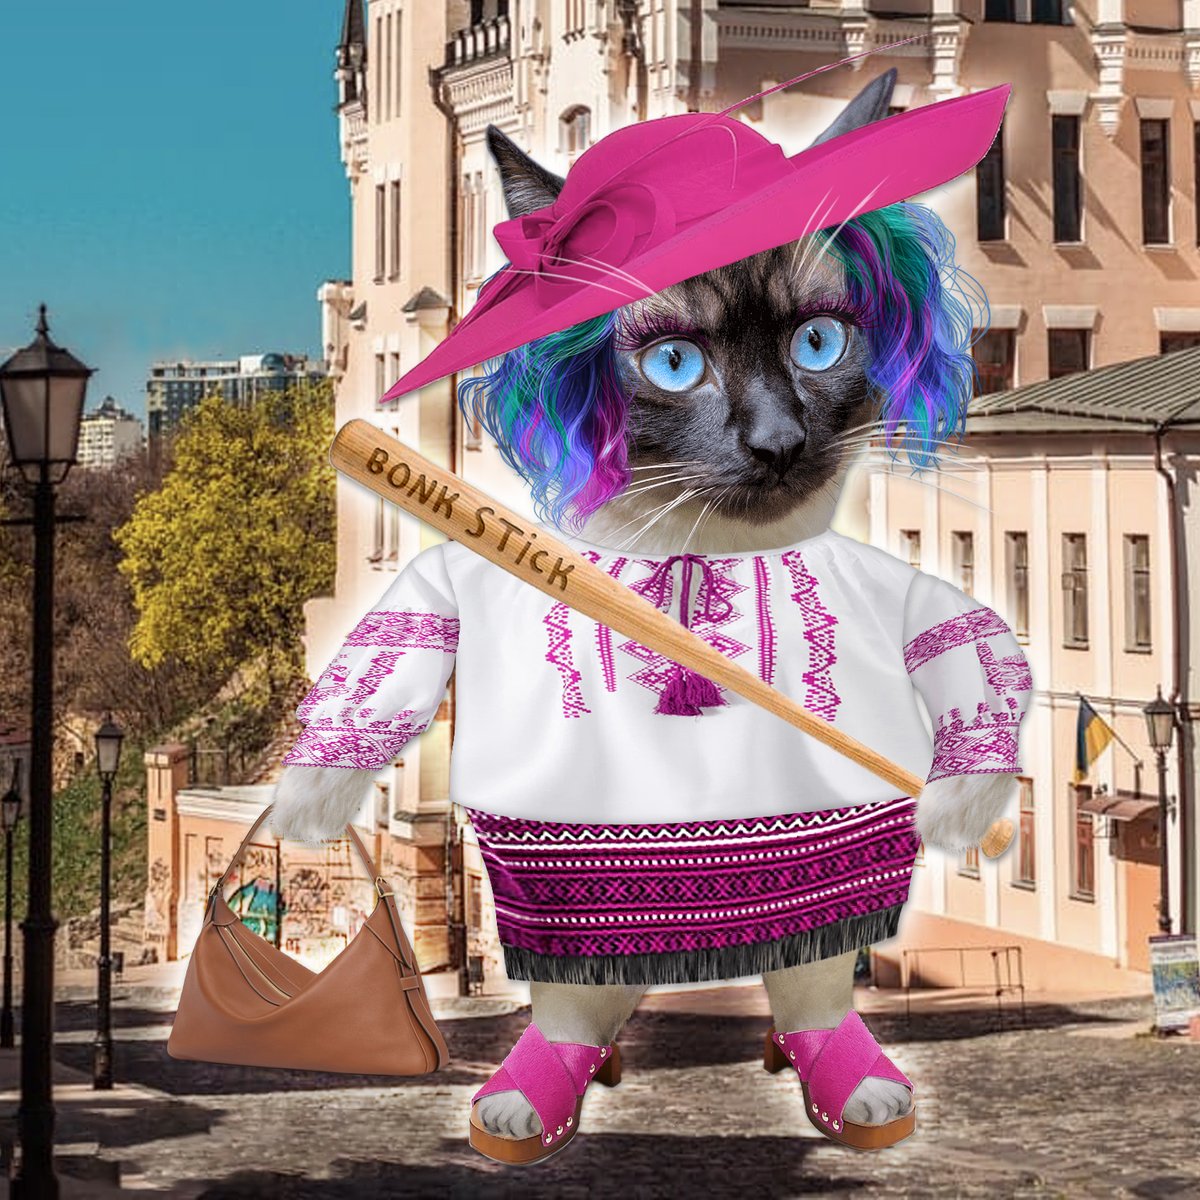 Siamese cat #FellaDelivery for @HaileyMurt.   

Welcome to #NAFOCatsDivision! Russian propagandists won't stand a chance against this determined and extremely fashionable fellarina!

#SlavaUkraini #NAFOExpansionIsNonNegotiable #NAFOfellas

@fellarequests @Official_NAFO